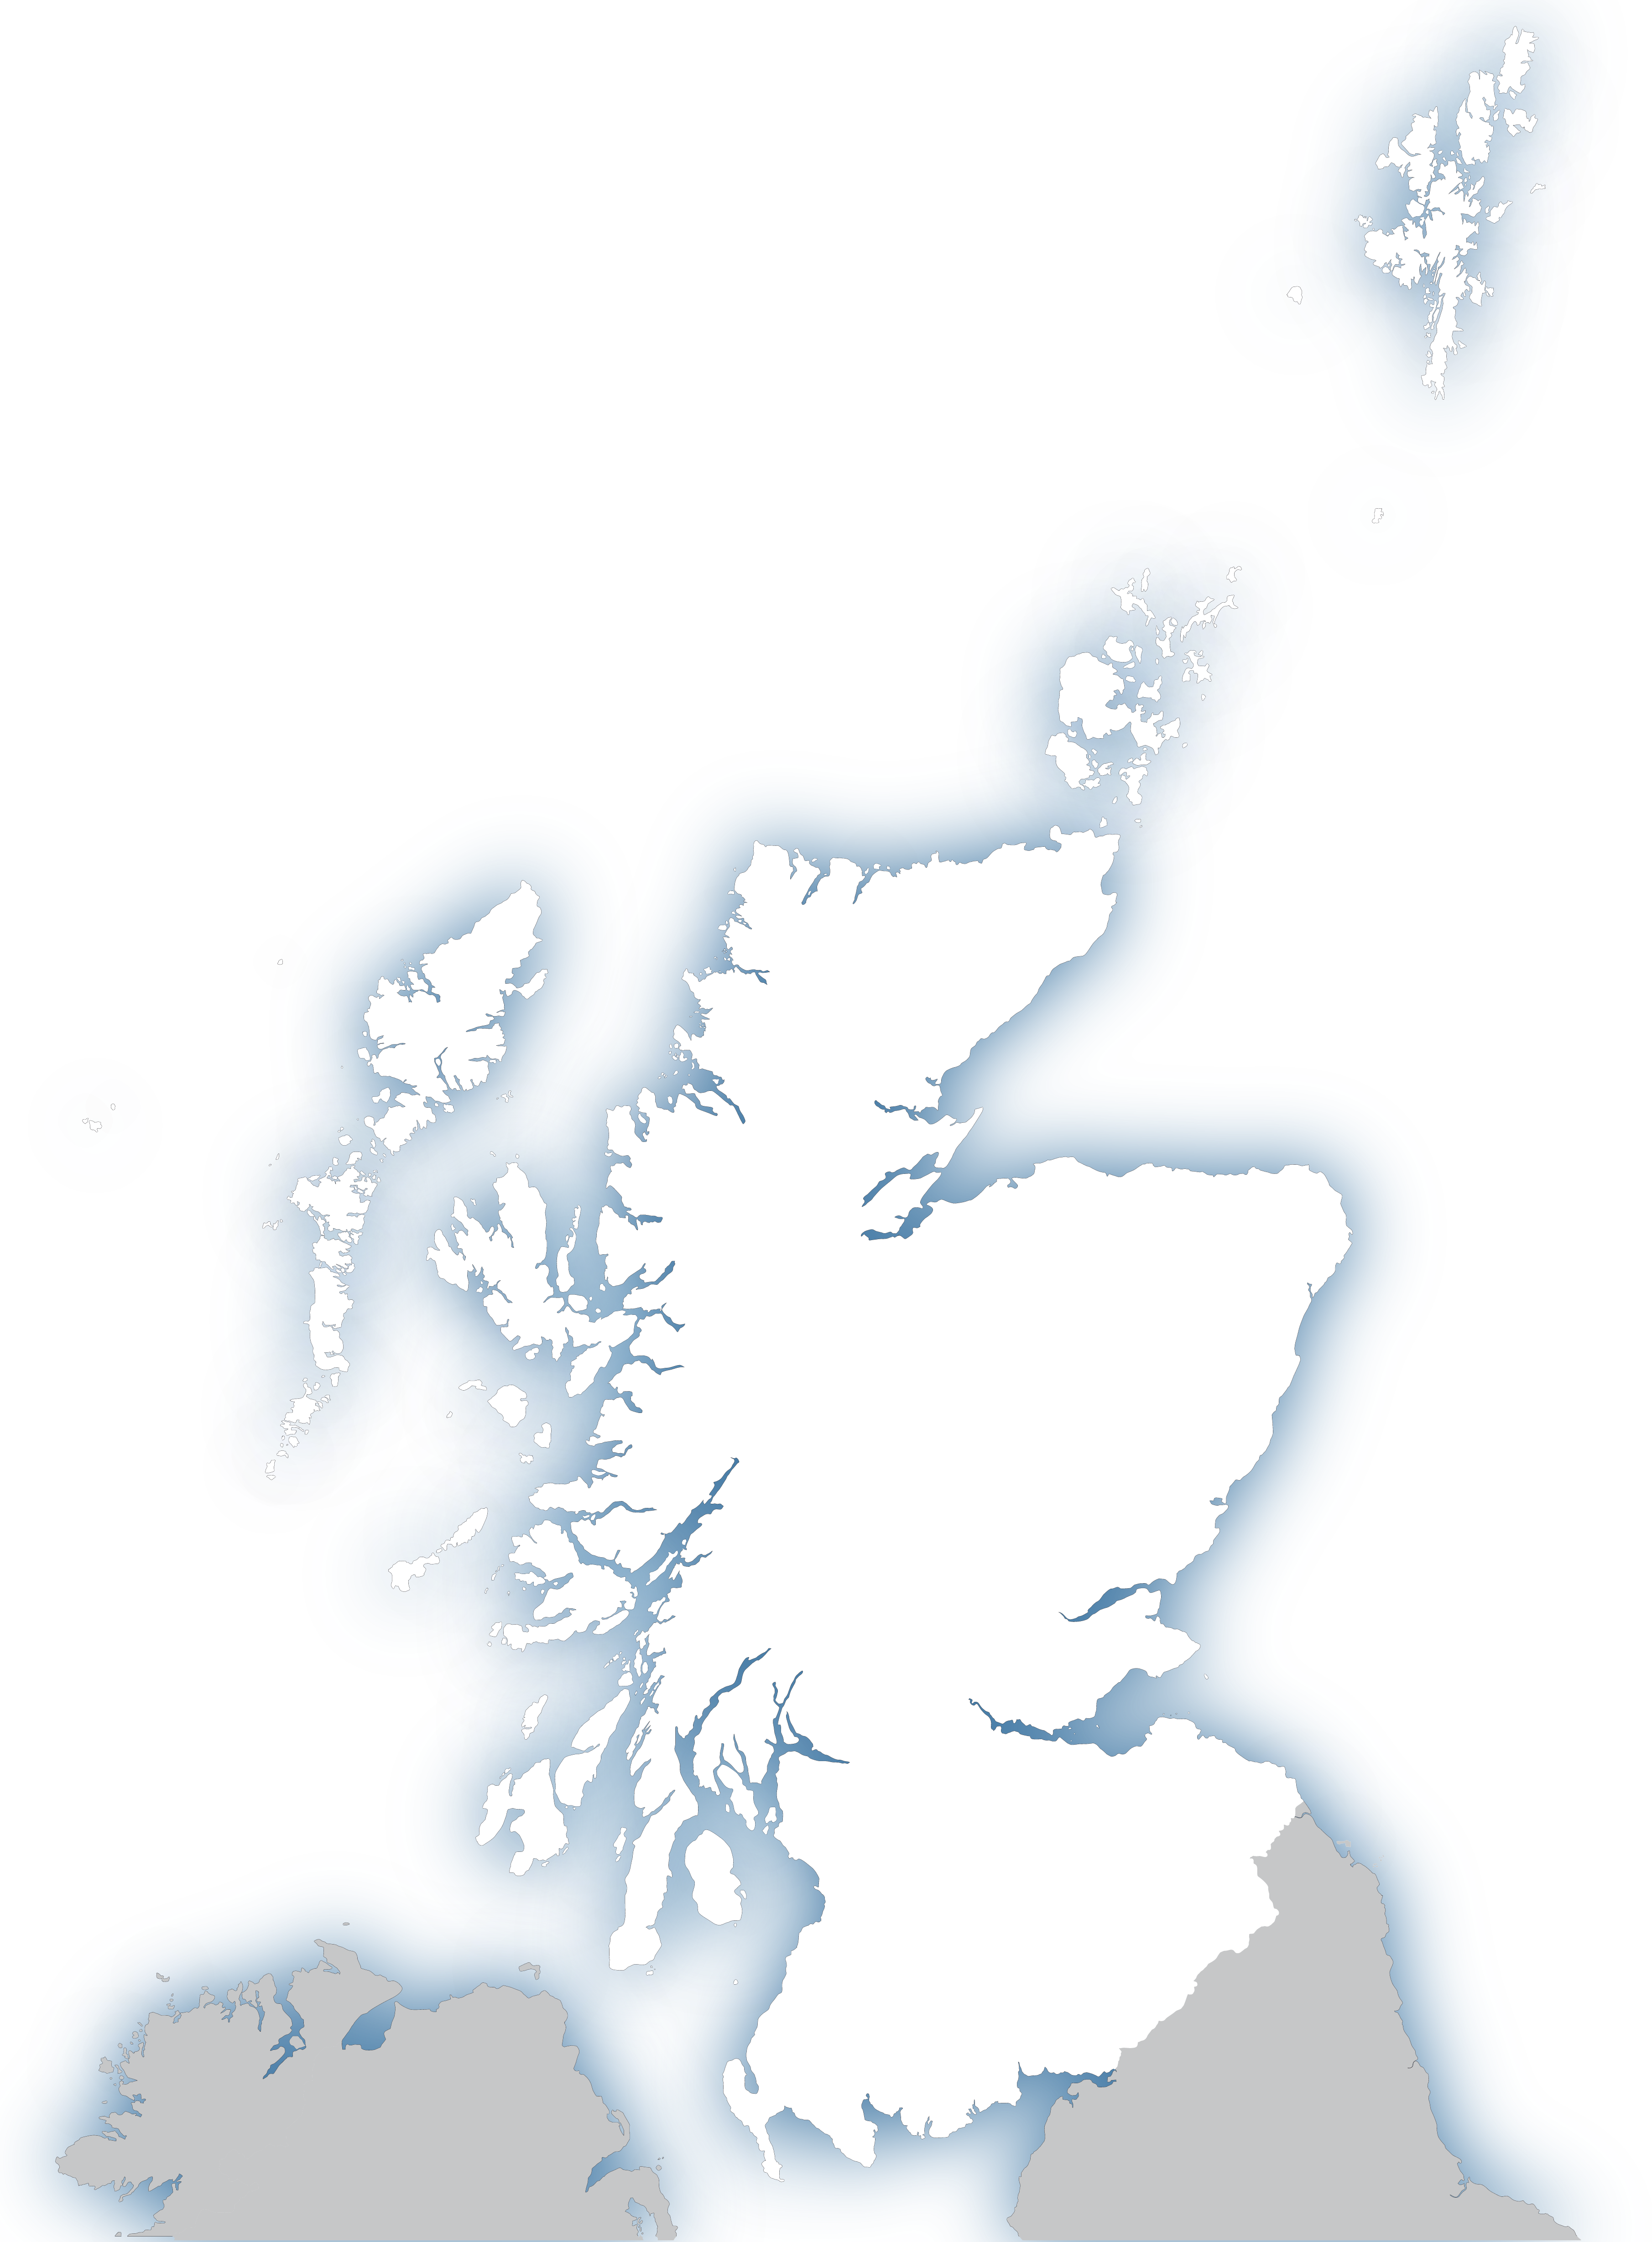 Scotland outline map - royalty free editable vector map - Maproom